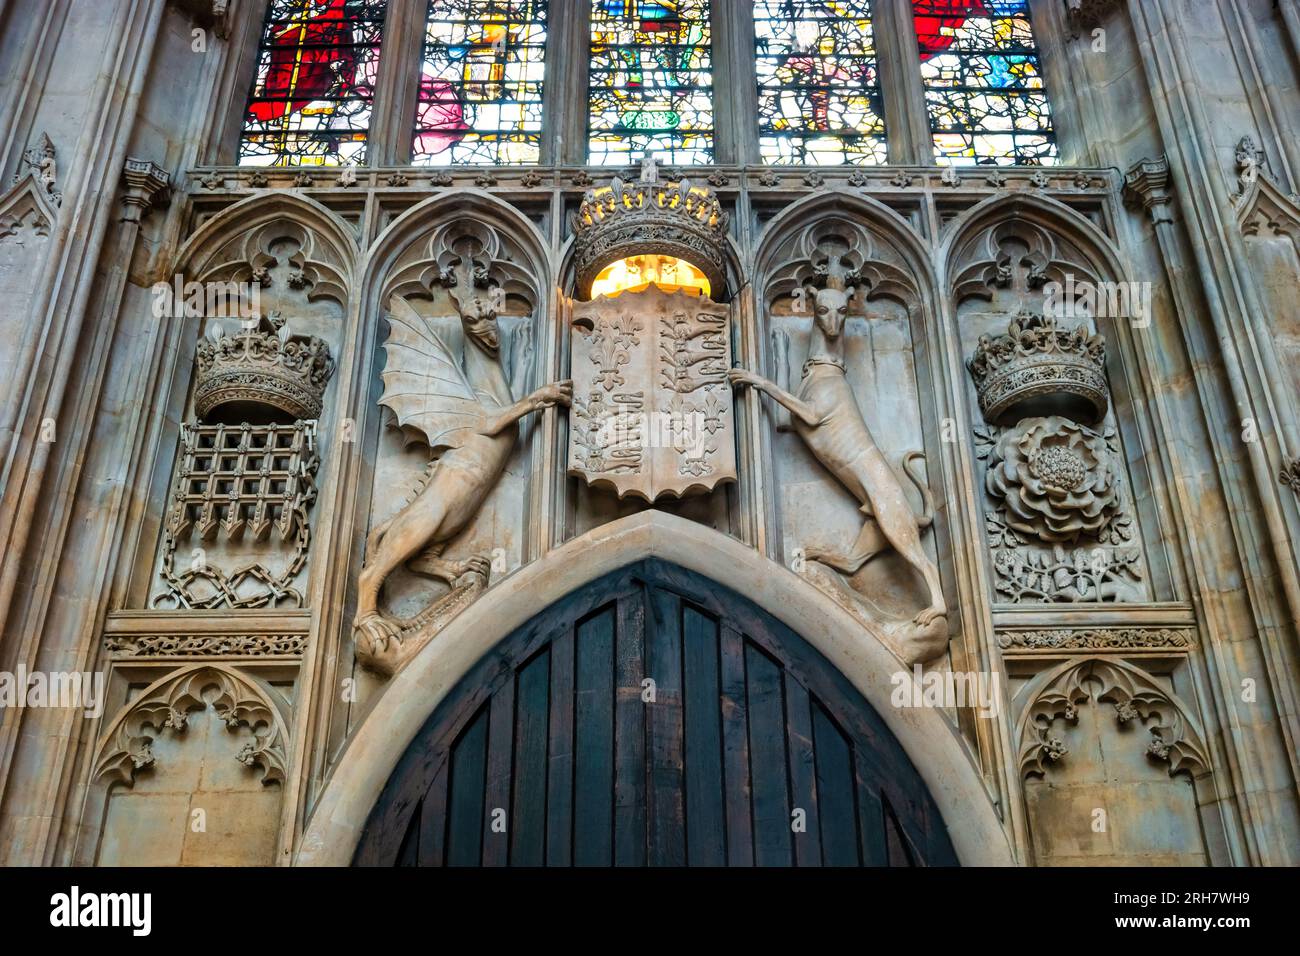 Coat of arms inside King's College Chapel in Cambridge, England, UK Stock Photo